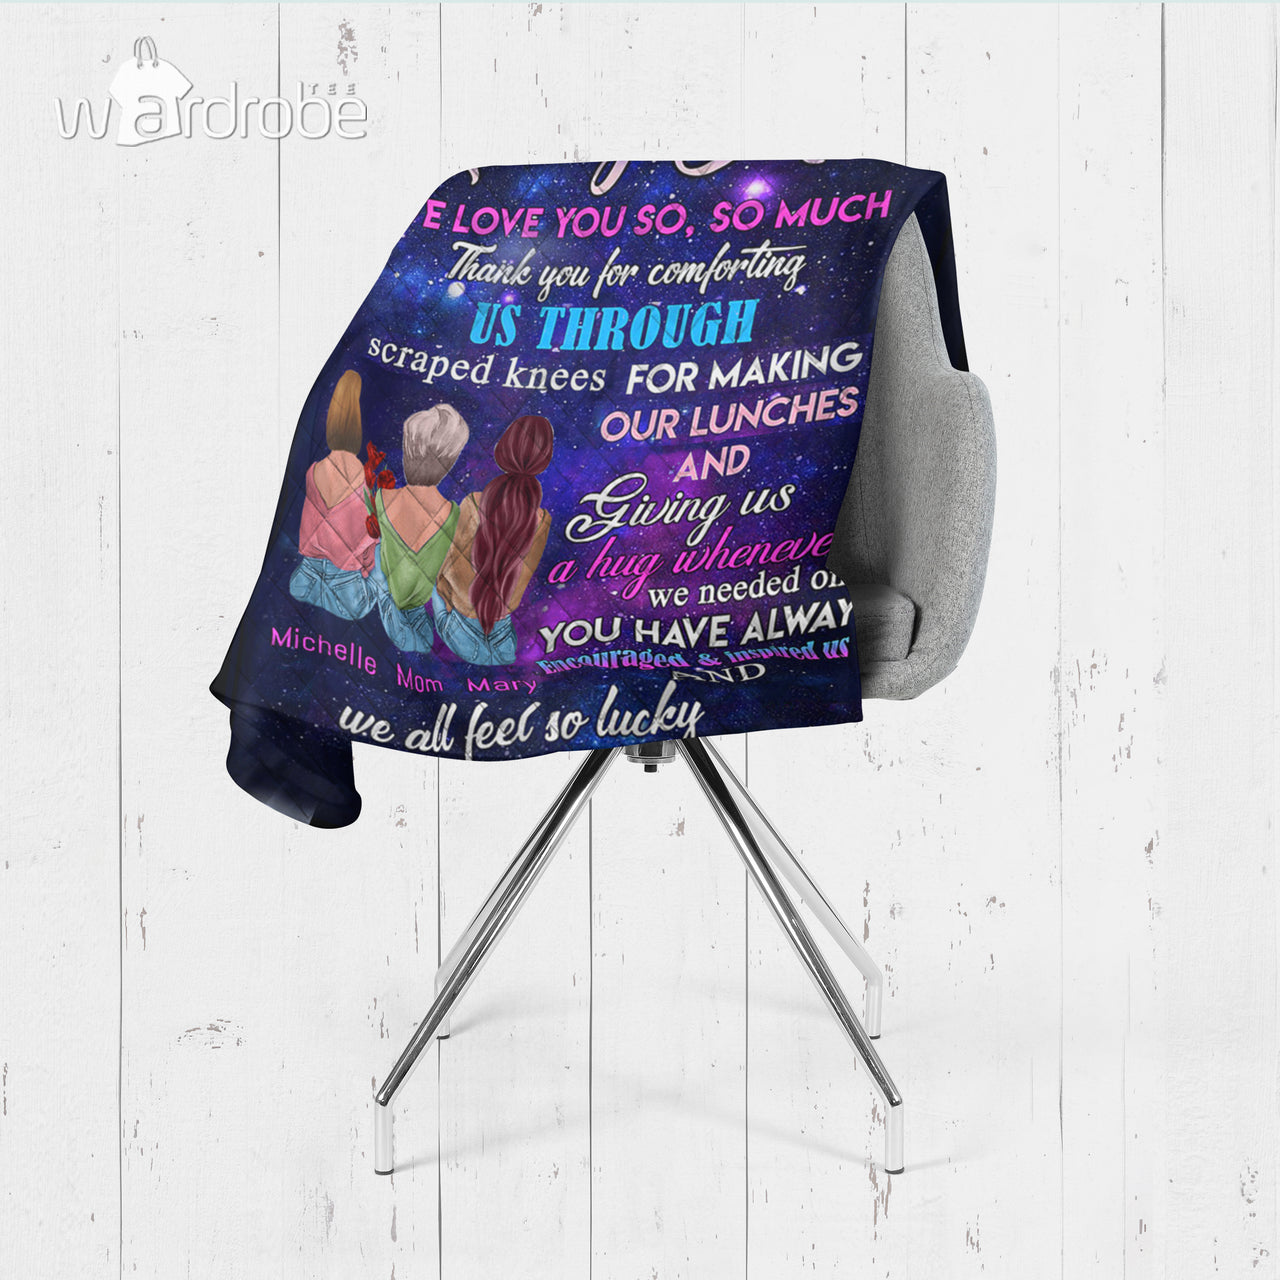 Personalized Mother's Day Gift Custom Blanket From Daughters To Our Loving Mom - Quilt Blanket